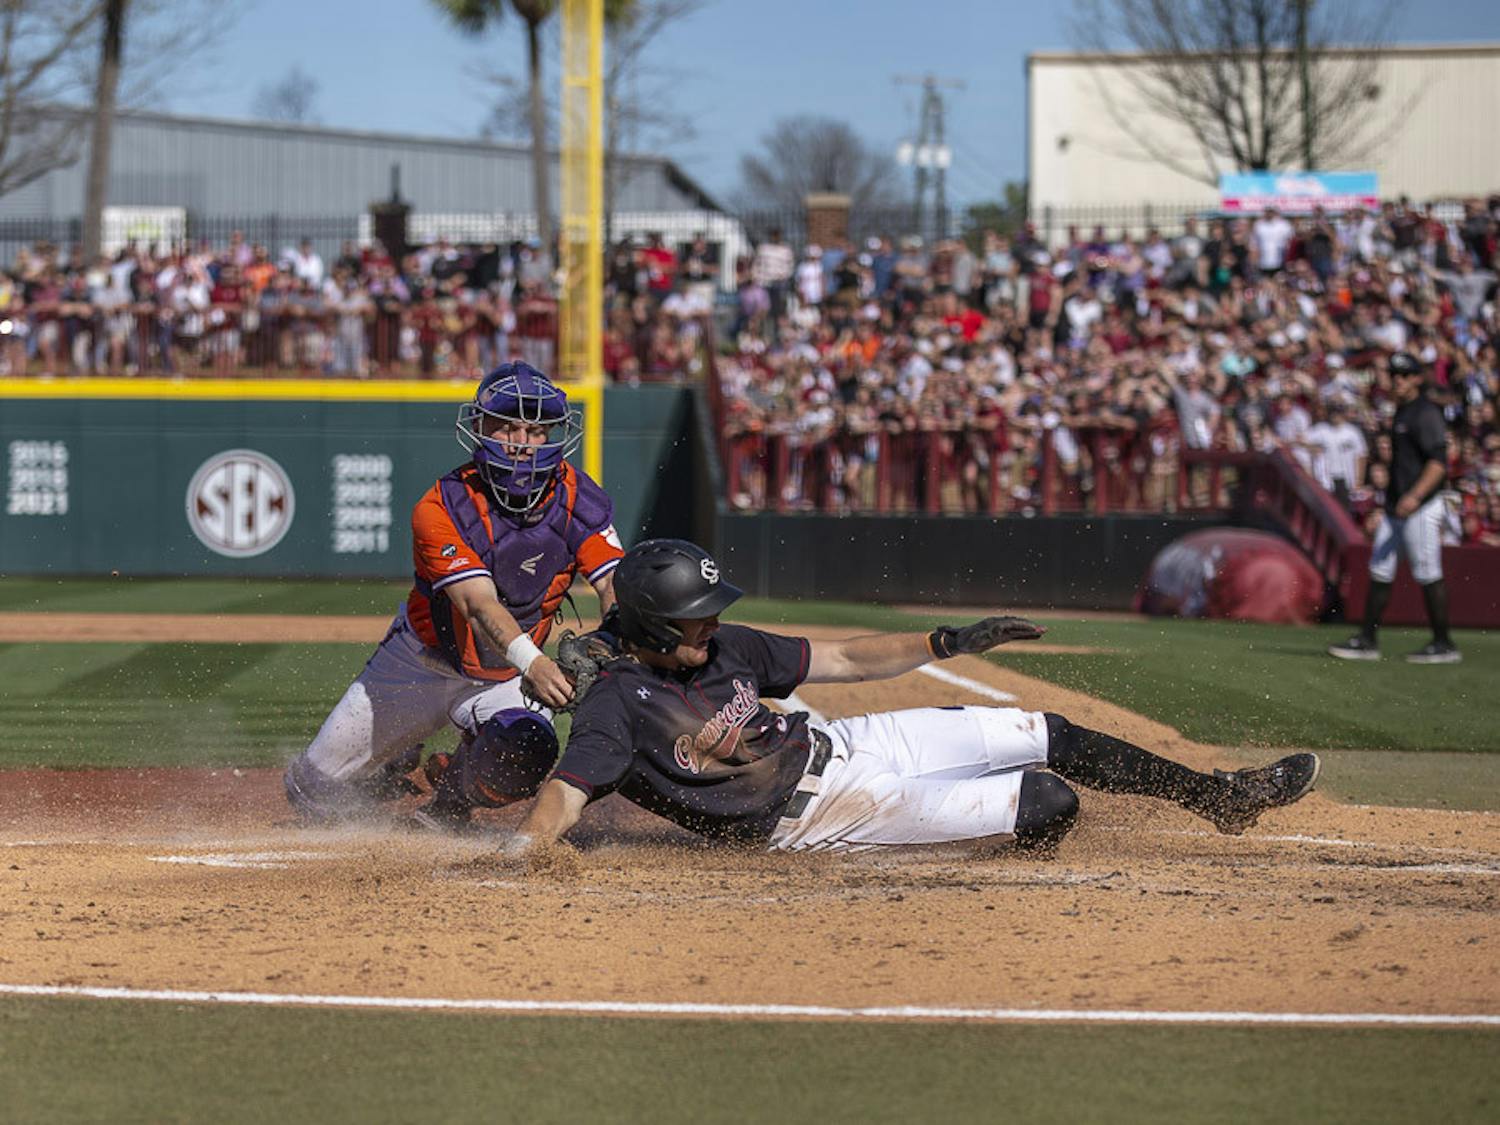 Senior infielder Braylen Wimmer slides onto home plate, scoring a point for South Carolina in the fifth inning against Clemson on March 5, 2023. The Gamecocks beat the Tigers 7-1.